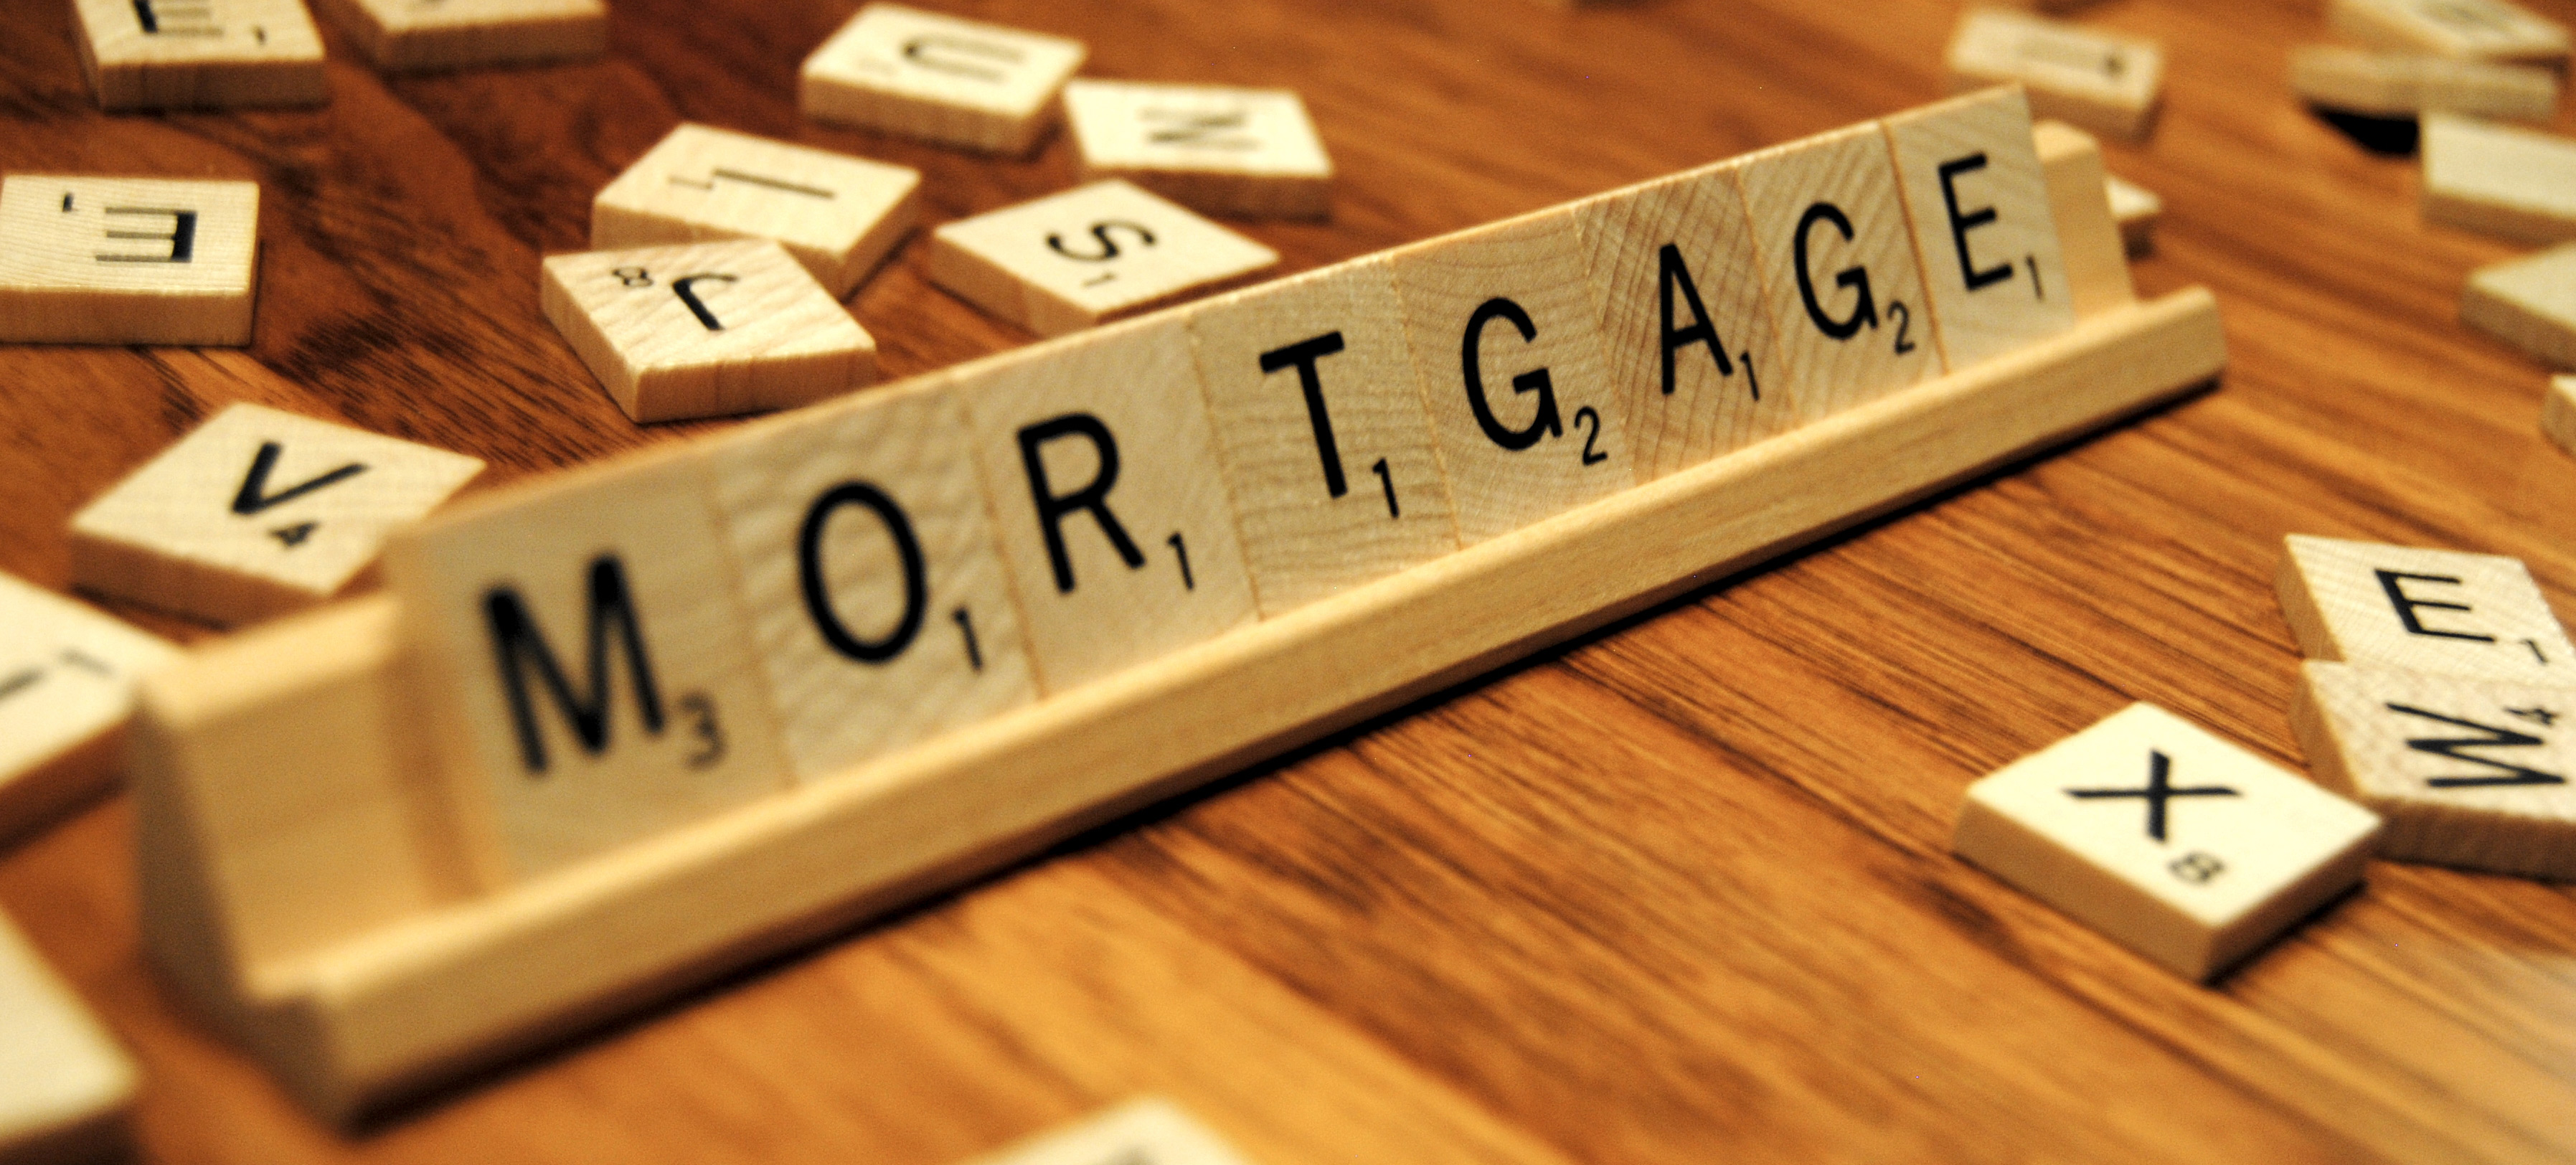 everything-you-need-to-know-about-mortgages-connect-asset-management